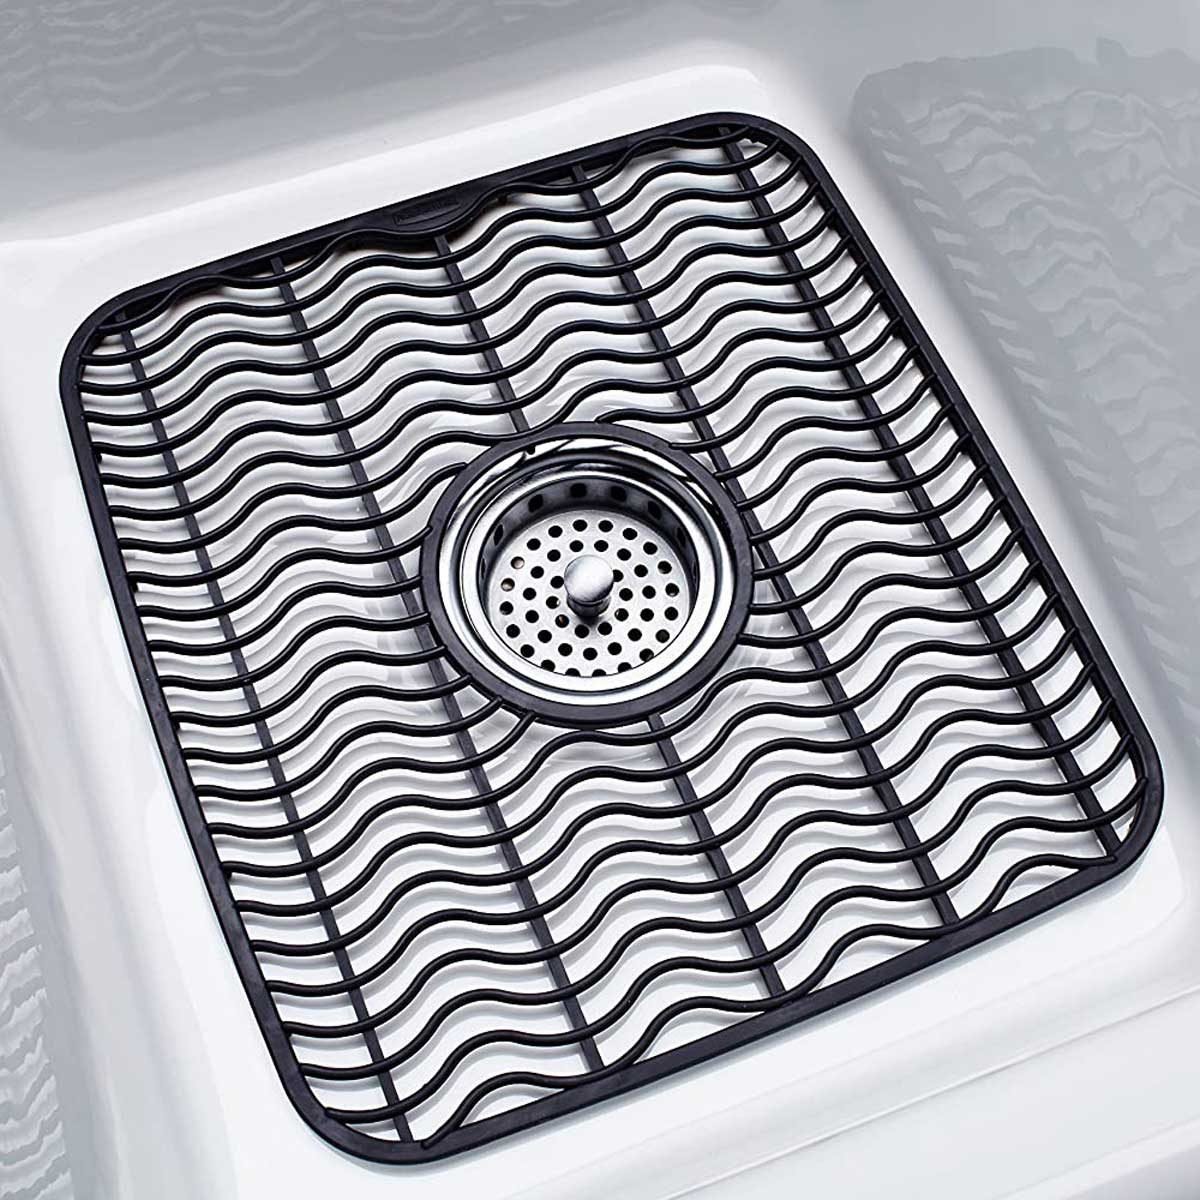 Set of 4 PC Kitchen Sink Mat Drain Pad Rubber Food Drainer Sink Protector Grid